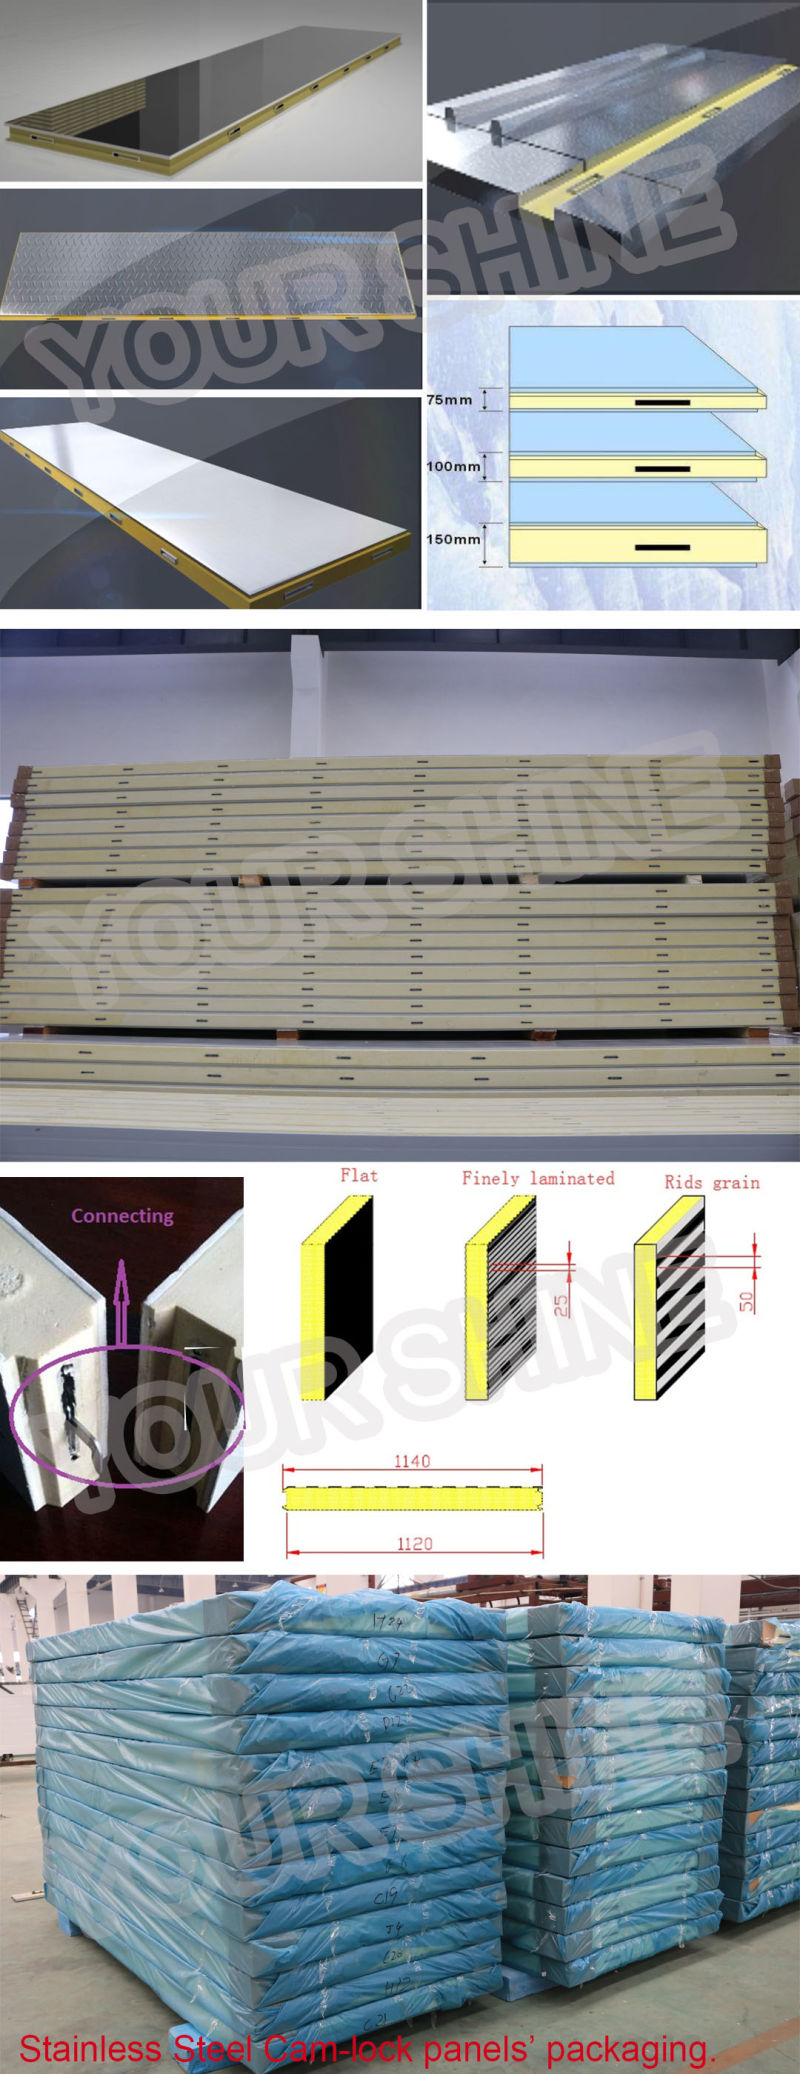 Foam Insulation PU Polyurethane Sandwich Panel for Cold Rooms